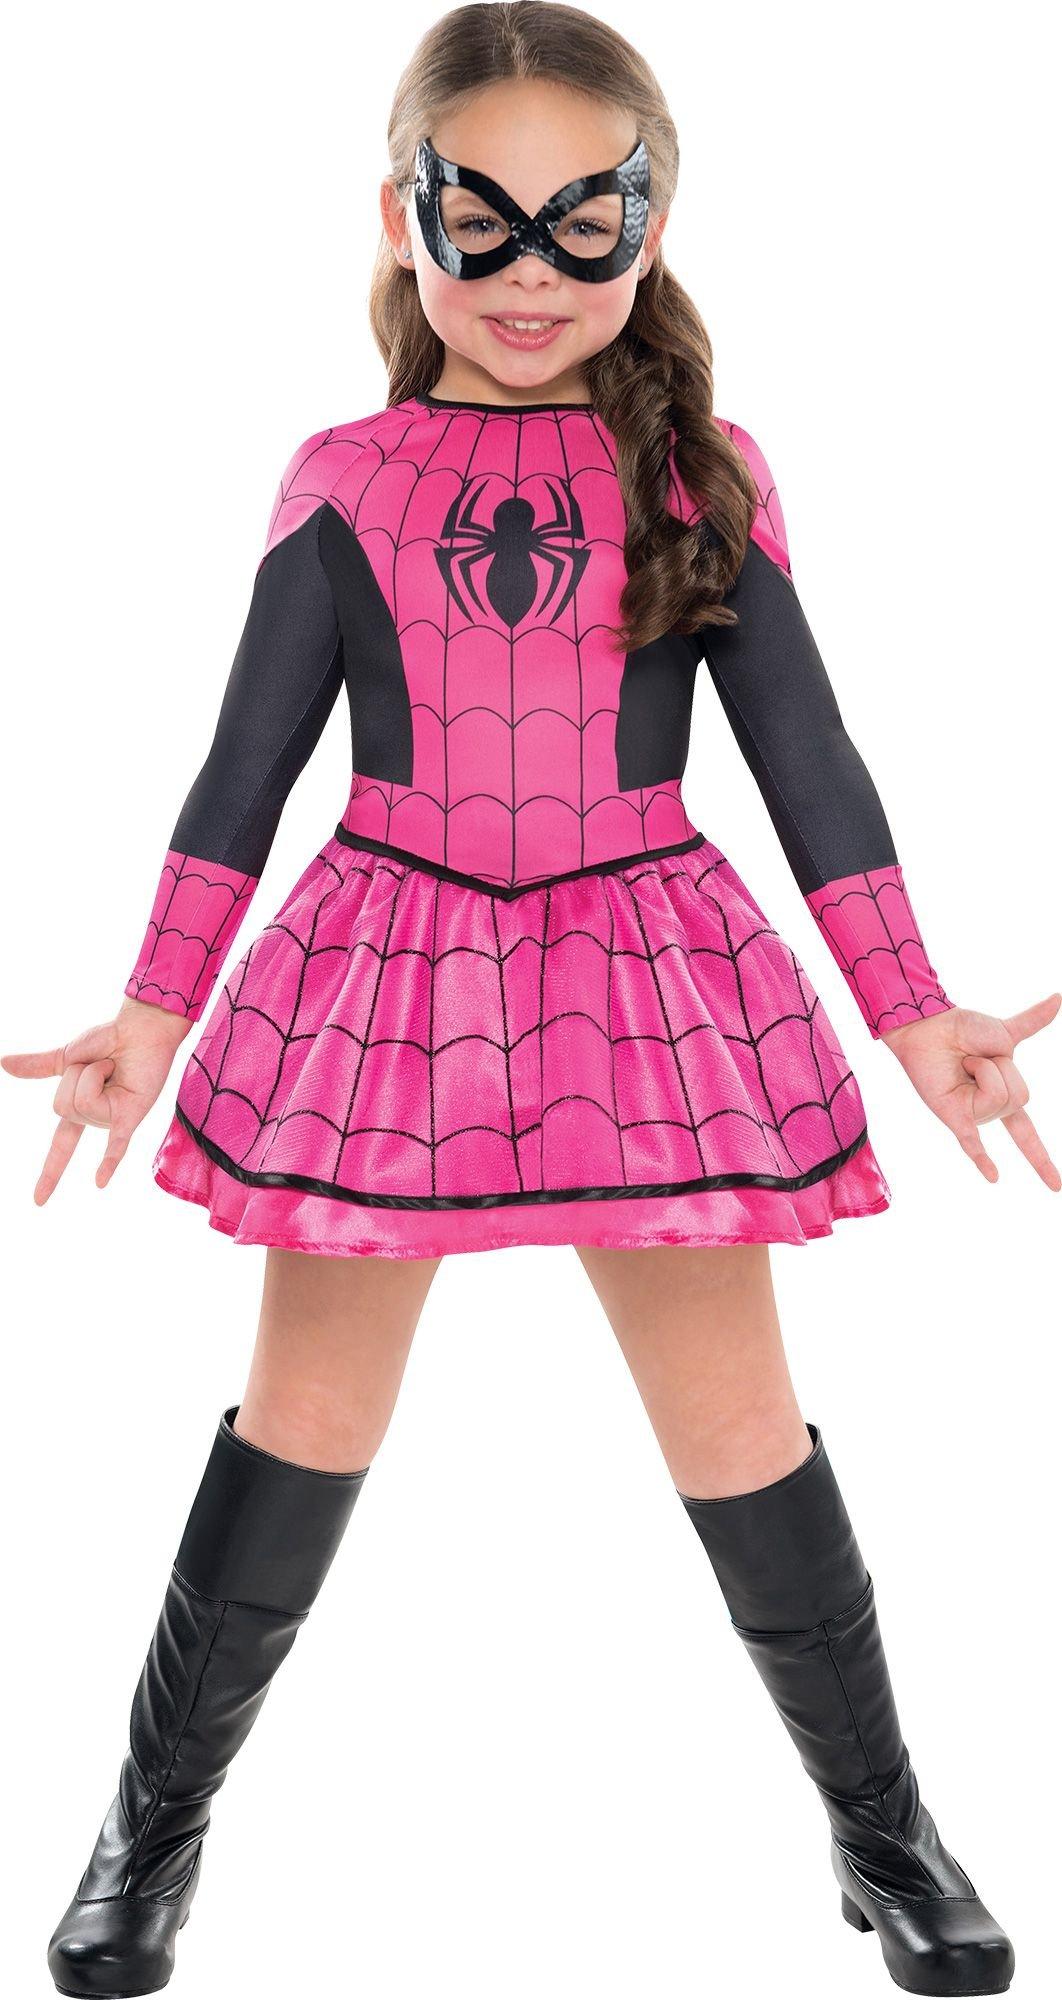 Pink Spider-Girl Costume for Toddlers & Kids, costume spider - okgo.net